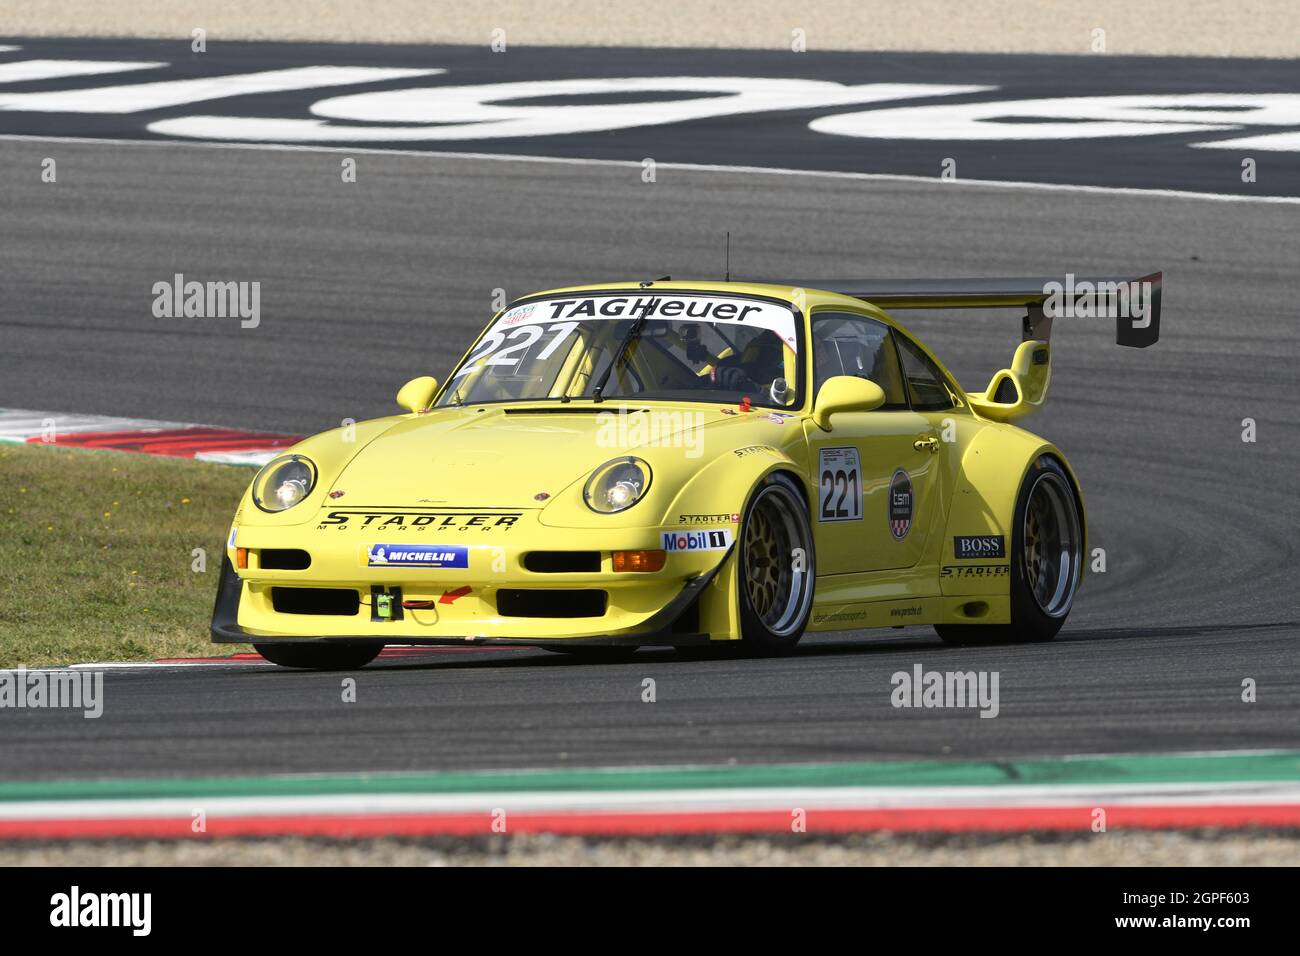 Mugello Circuit, Italy - 23 September 2021: Porsche 993 GT2 R in action at Mugello Circuit during Porsche Sports Cup Suisse event 2021 driven by unkno Stock Photo